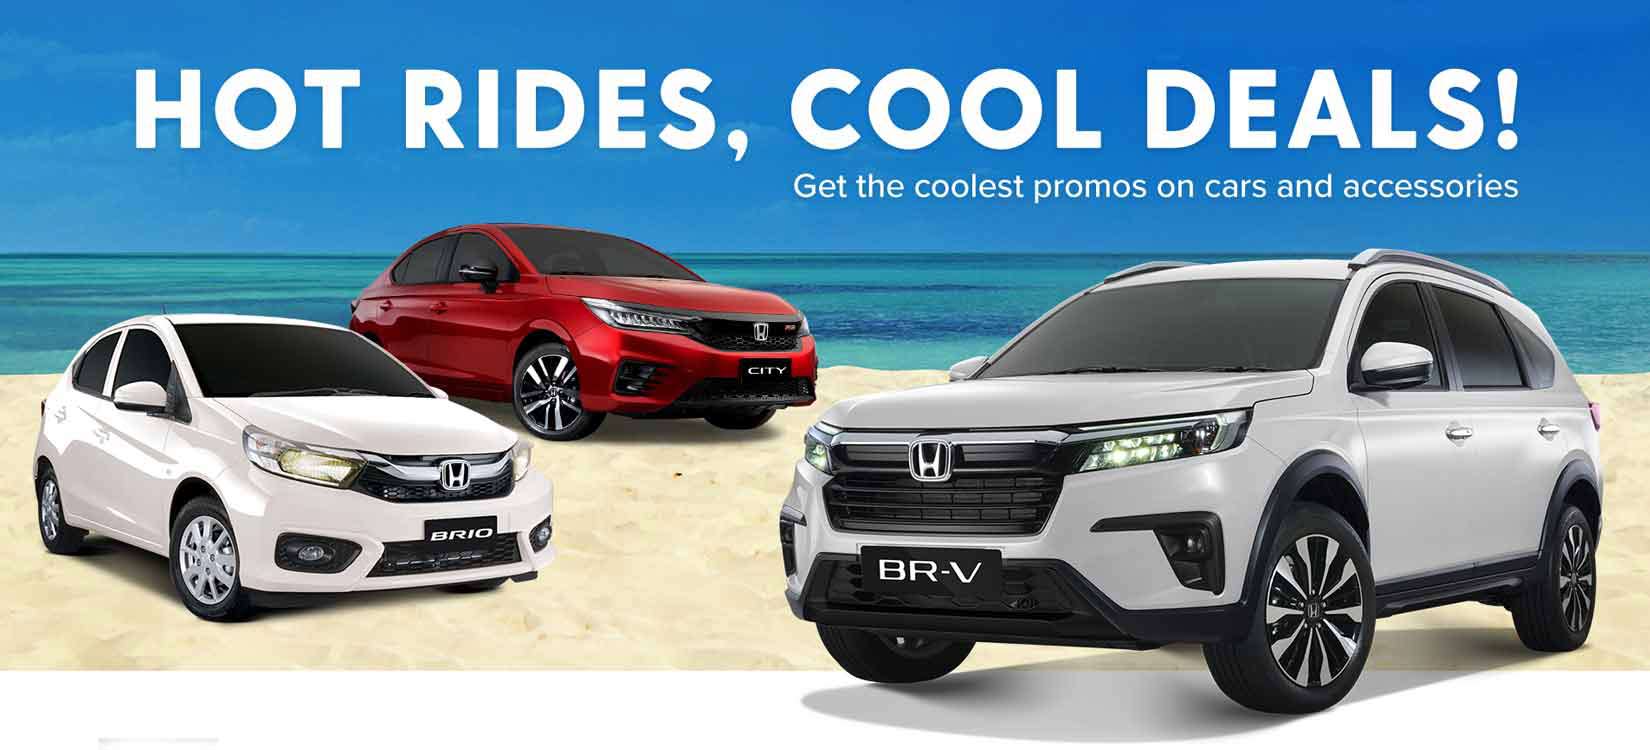 Beat the heat with Honda Cars’ extended Hot Rides, Cool Deals promo